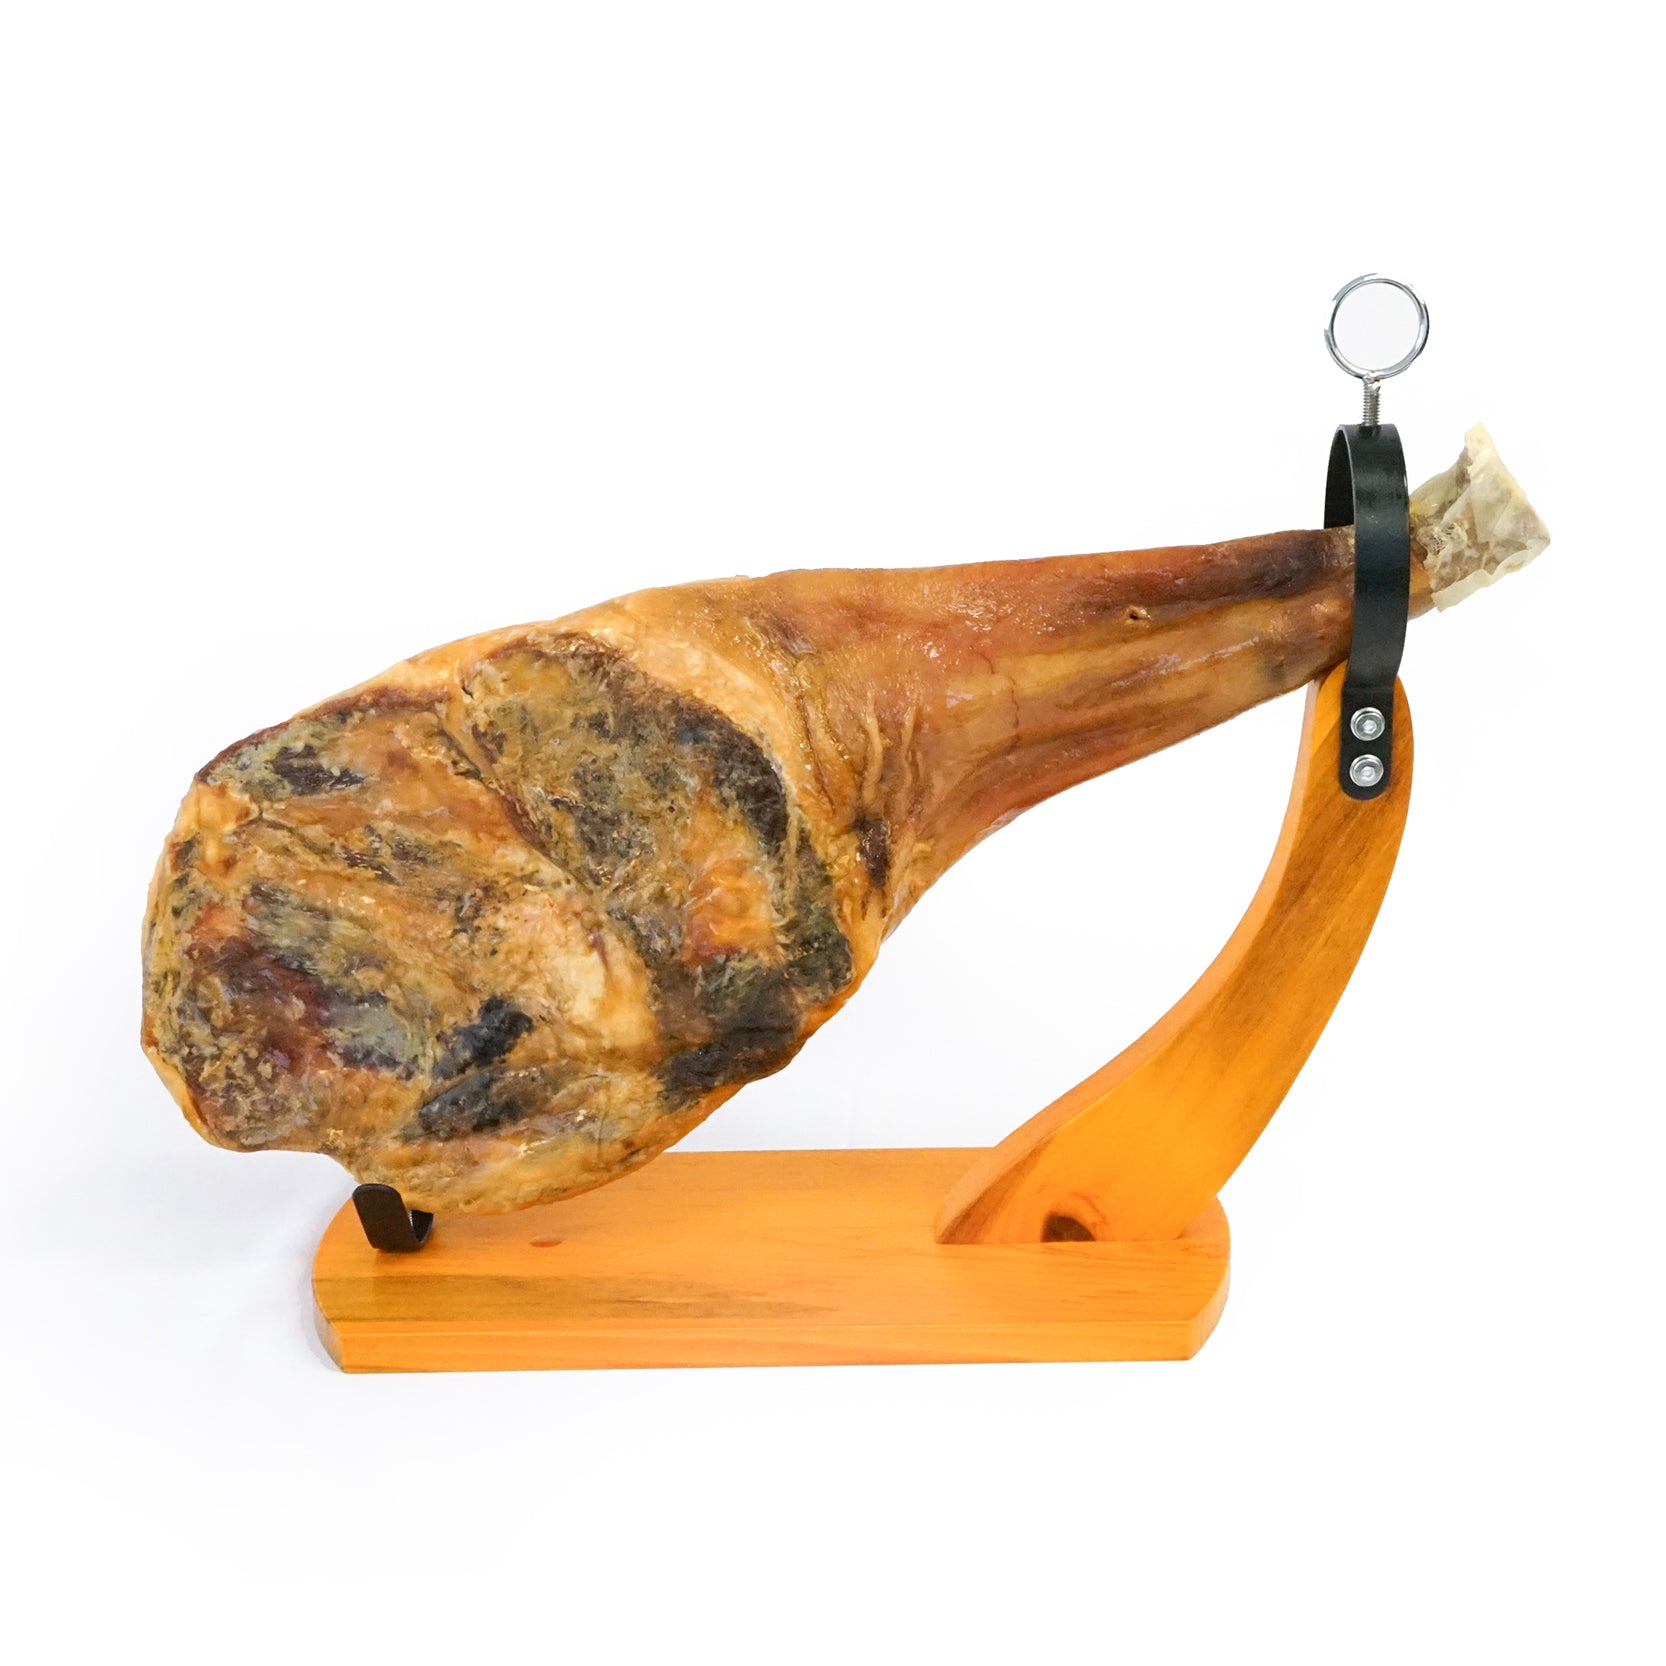 Iberico Ham (Shoulder) All Natural (Exclusive Product) by Fermin